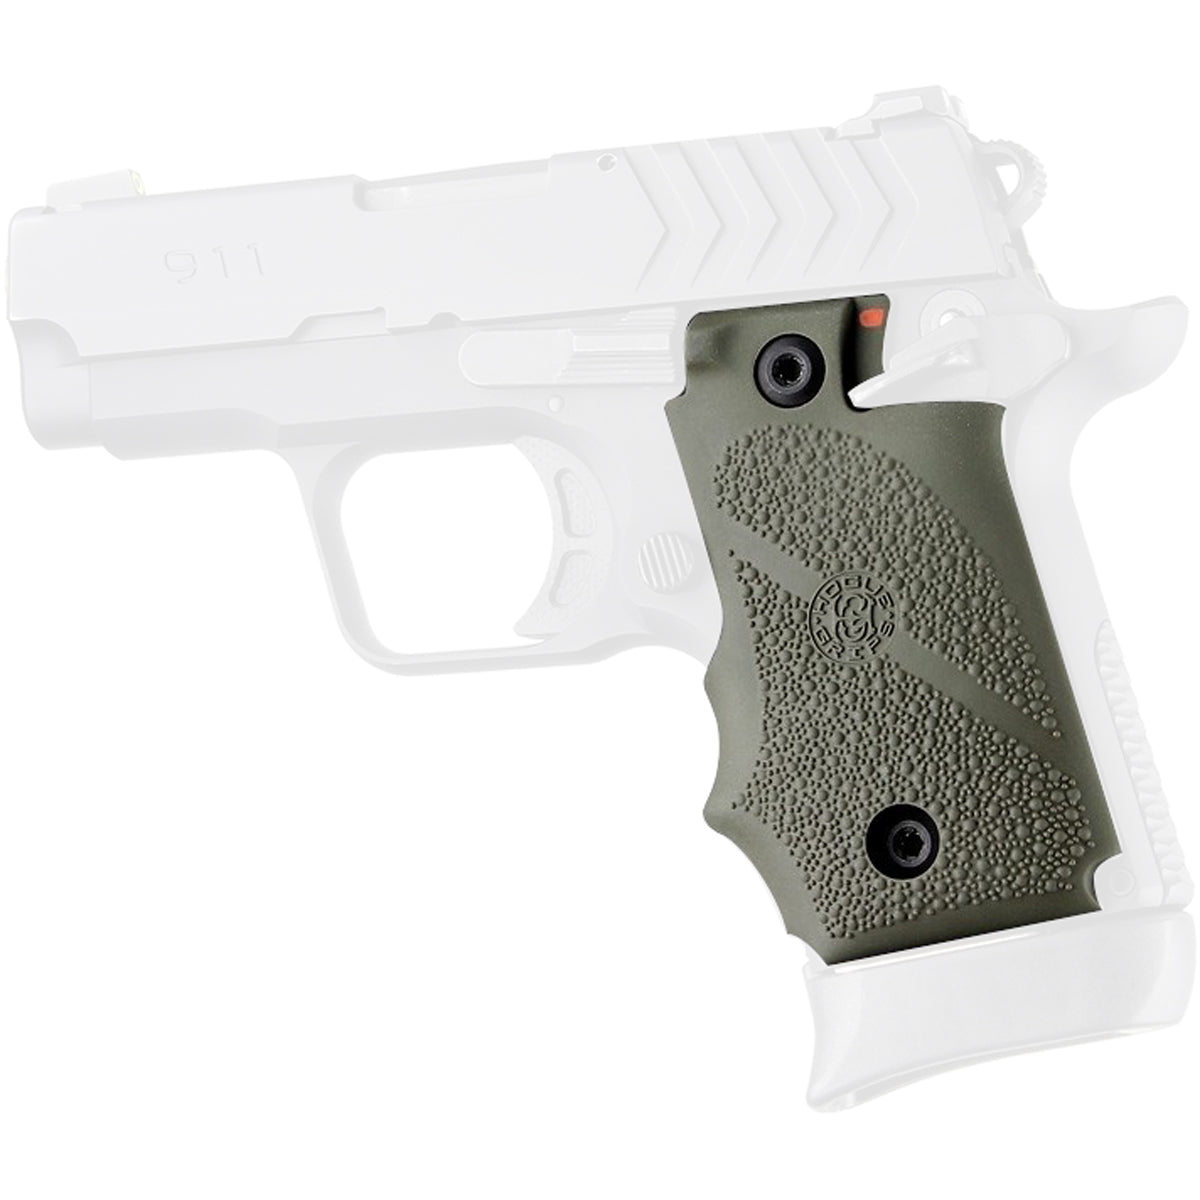 Hogue Springfield Armory 911 9mm Ambi Safety Rubber Grip with Finger Grooves Hogue